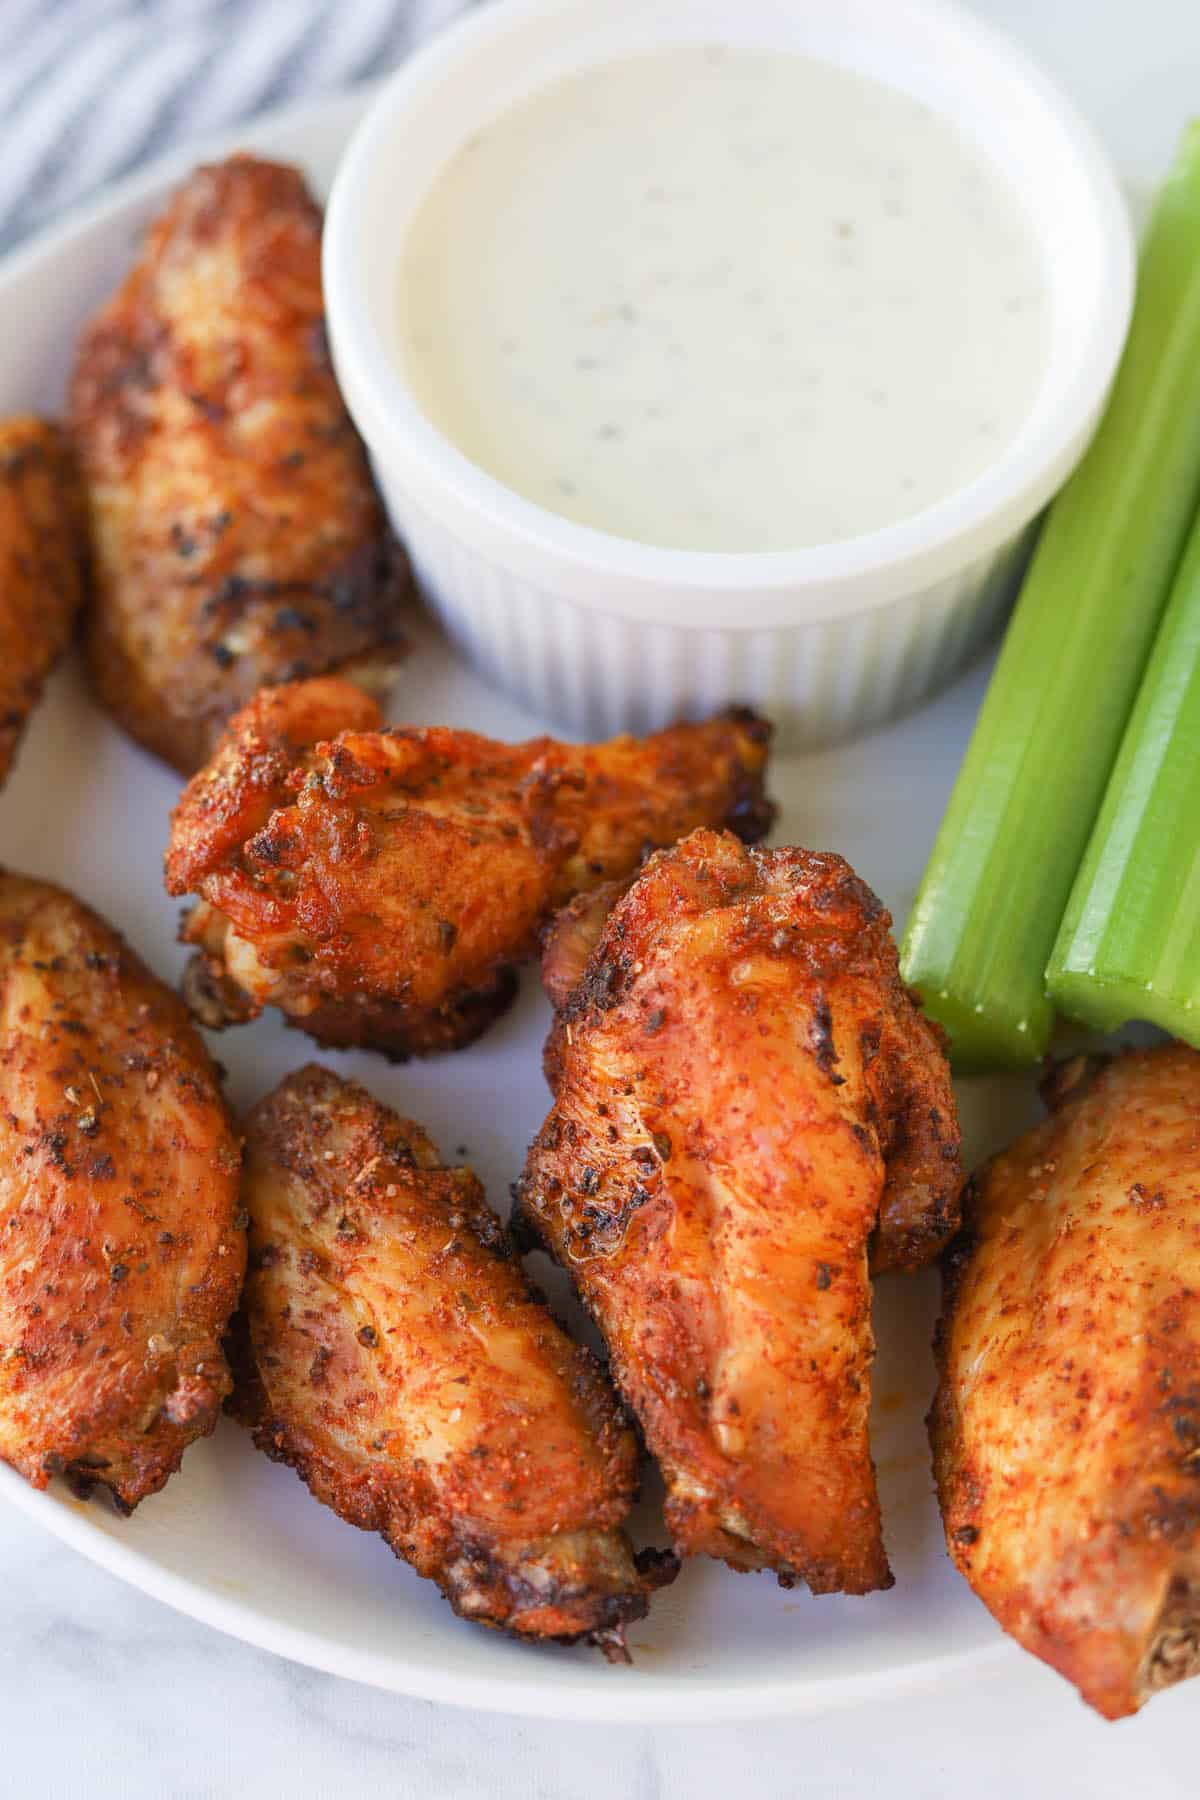 Plate of chicken wings with dip.